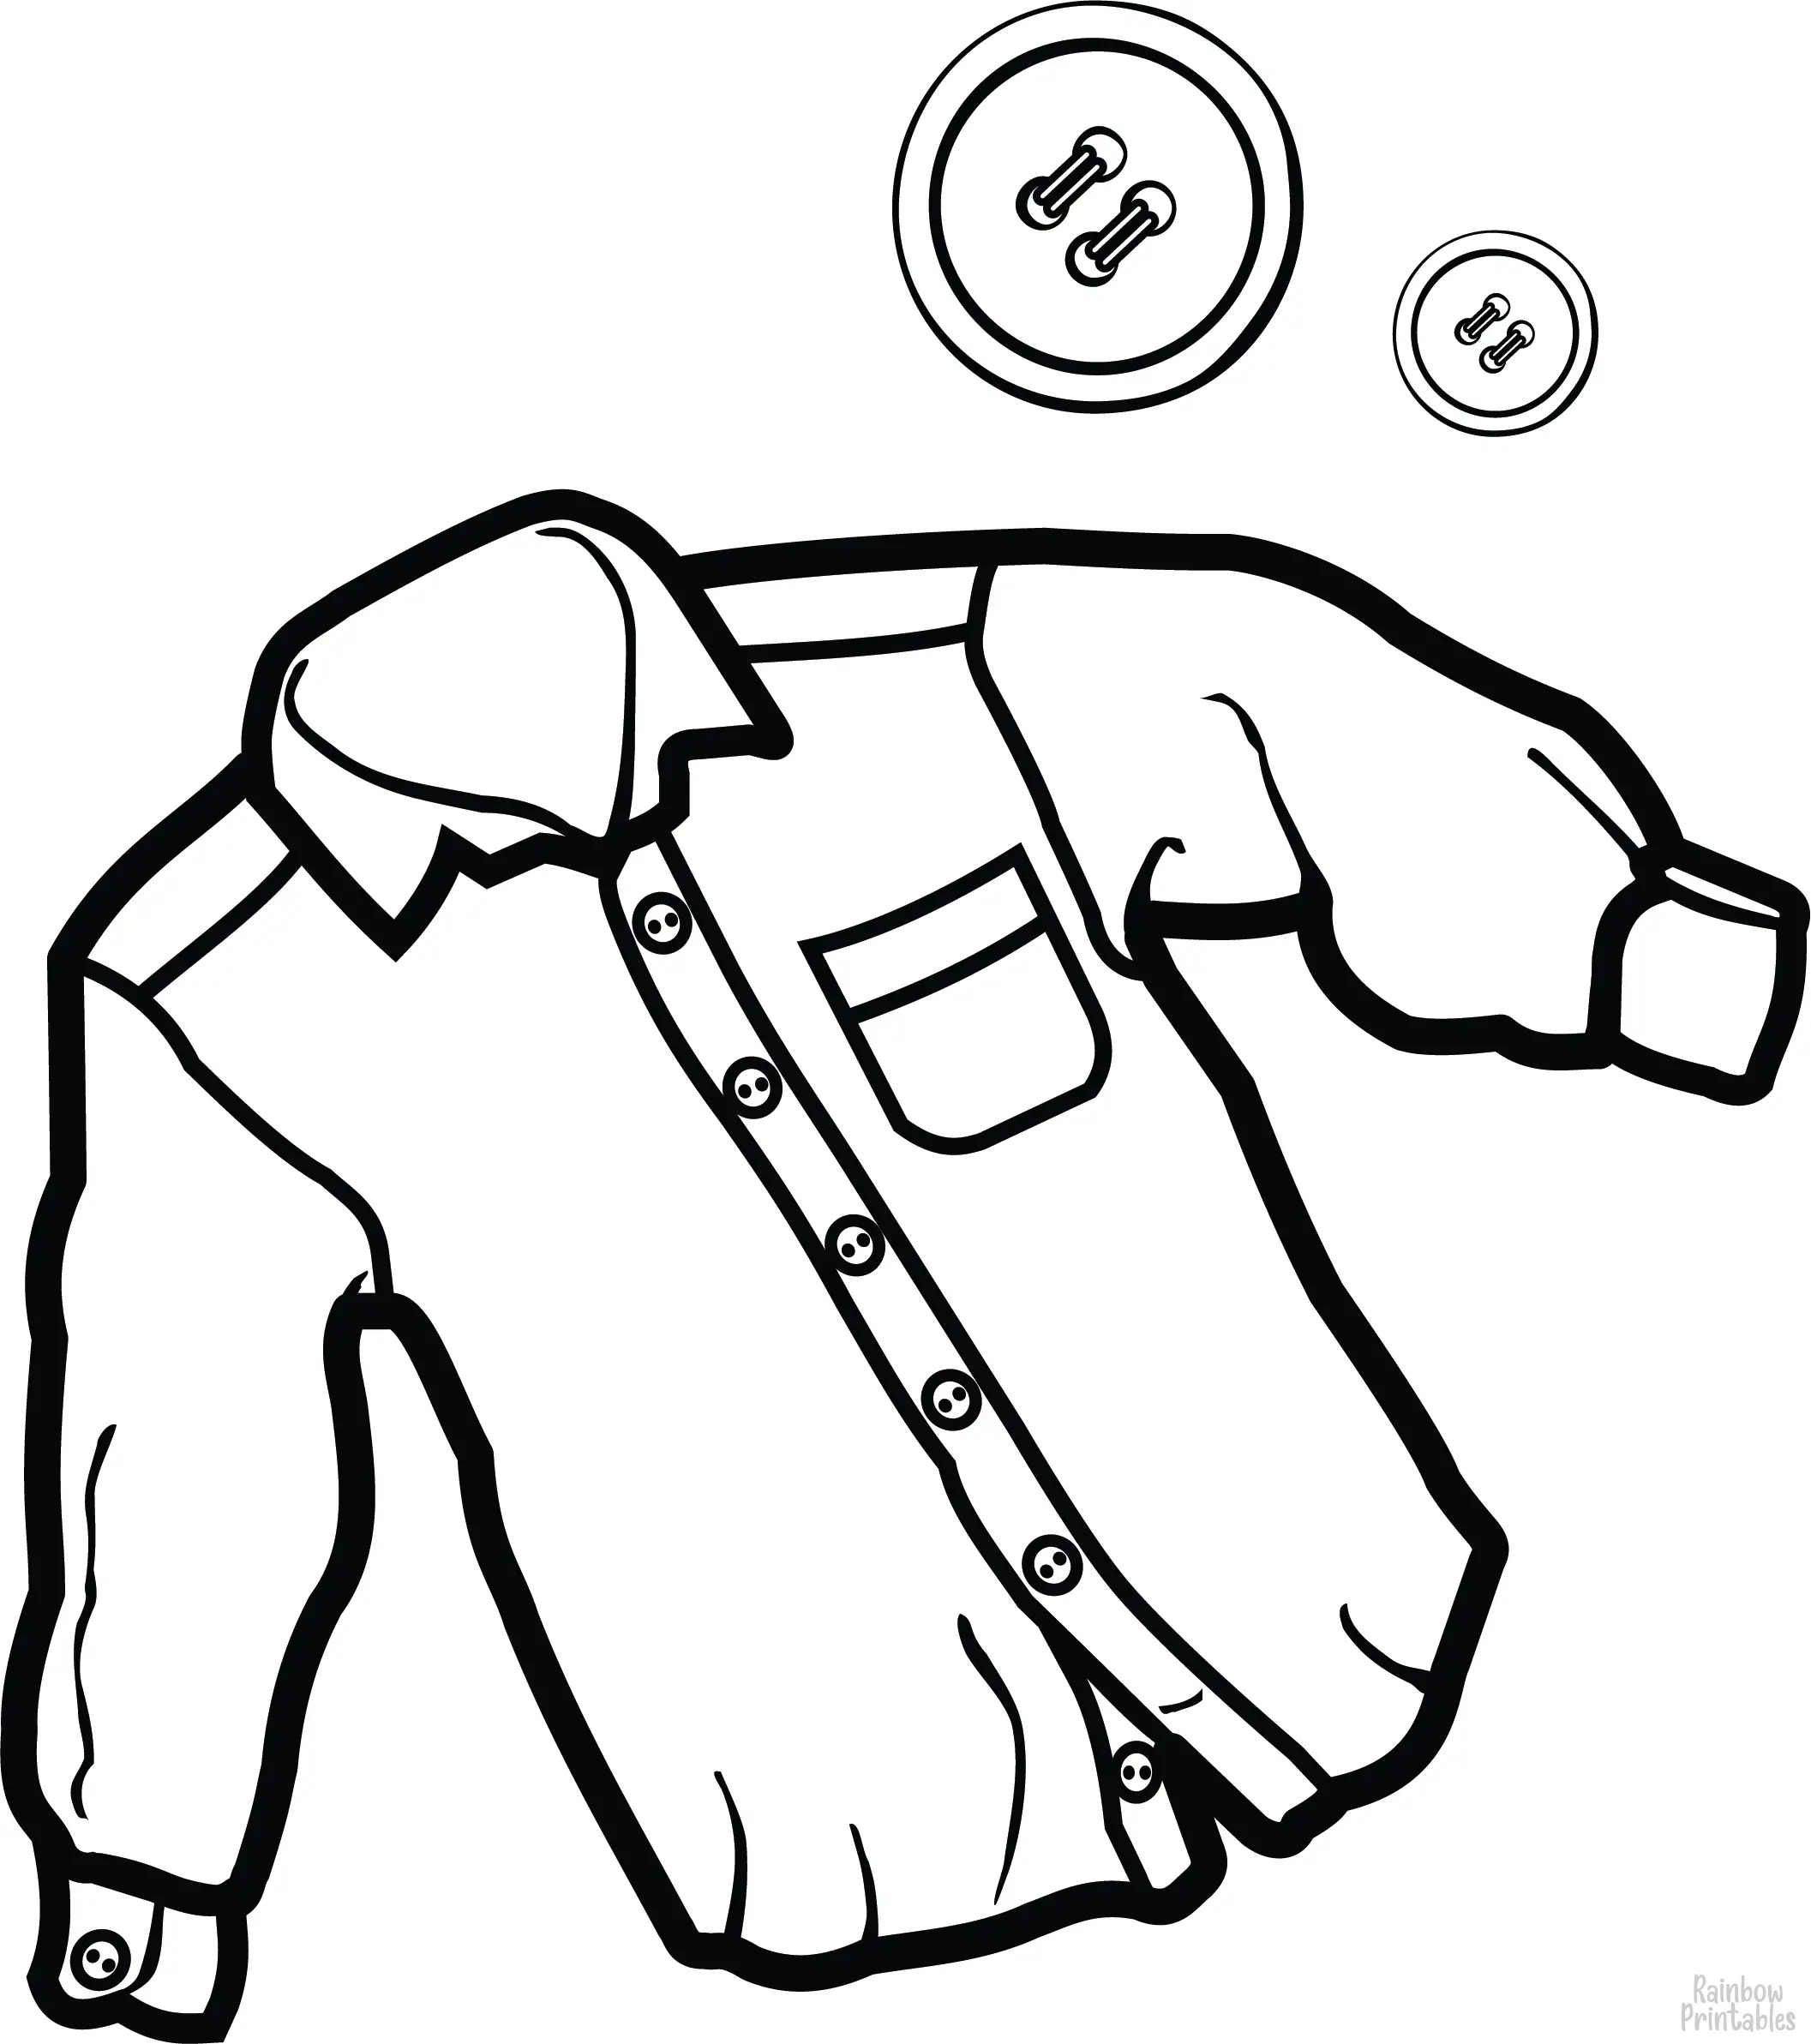 Clothing Set Shirt With Buttons Coloring Activity Pages for Kids